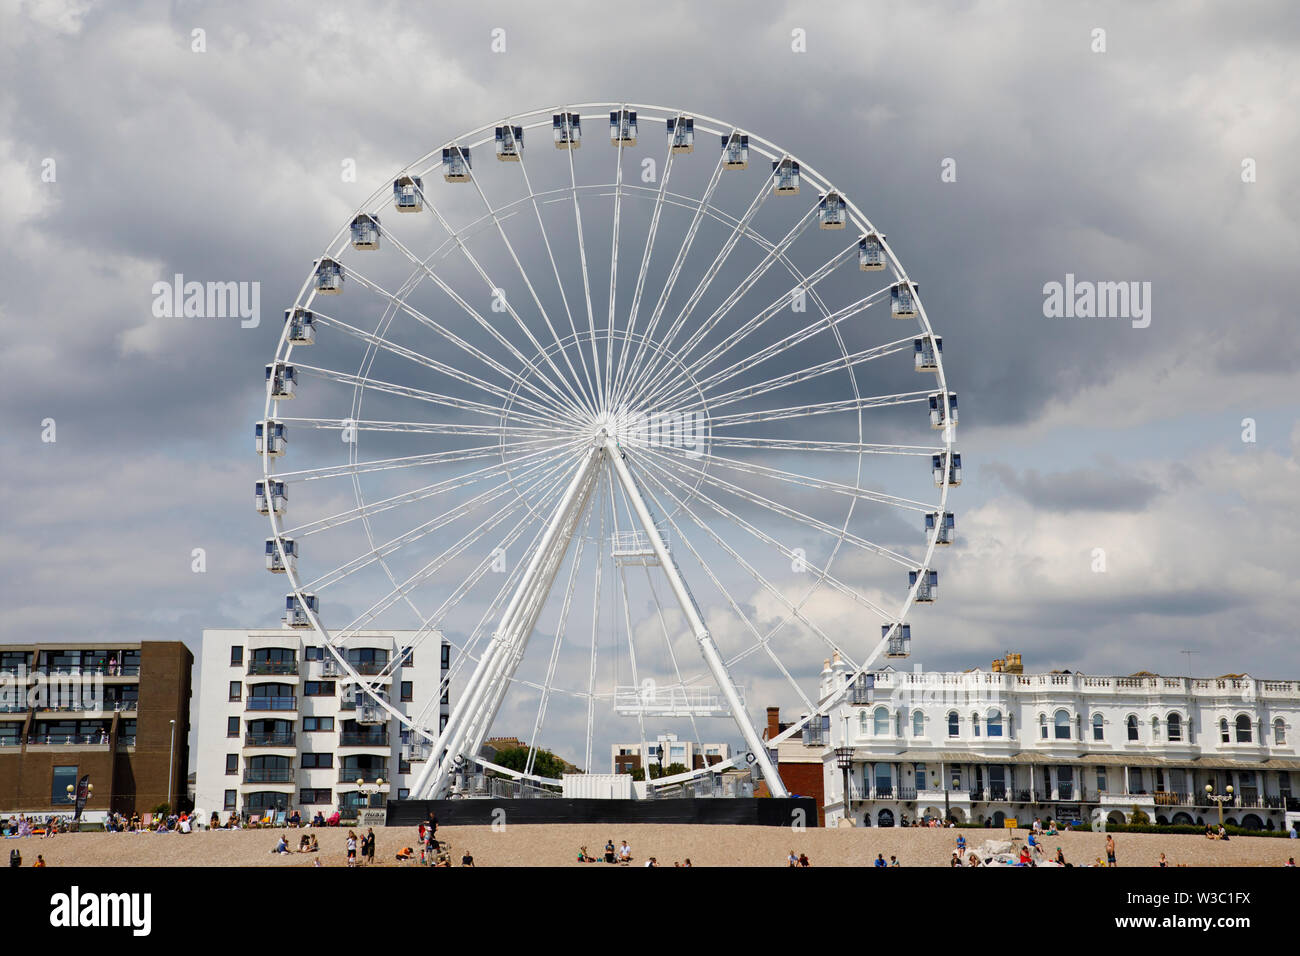 WORTHING, UK - JULY 13, 2019: People enjoy a day out on the pebble beach in Worthing with newly opened Wheel Stock Photo